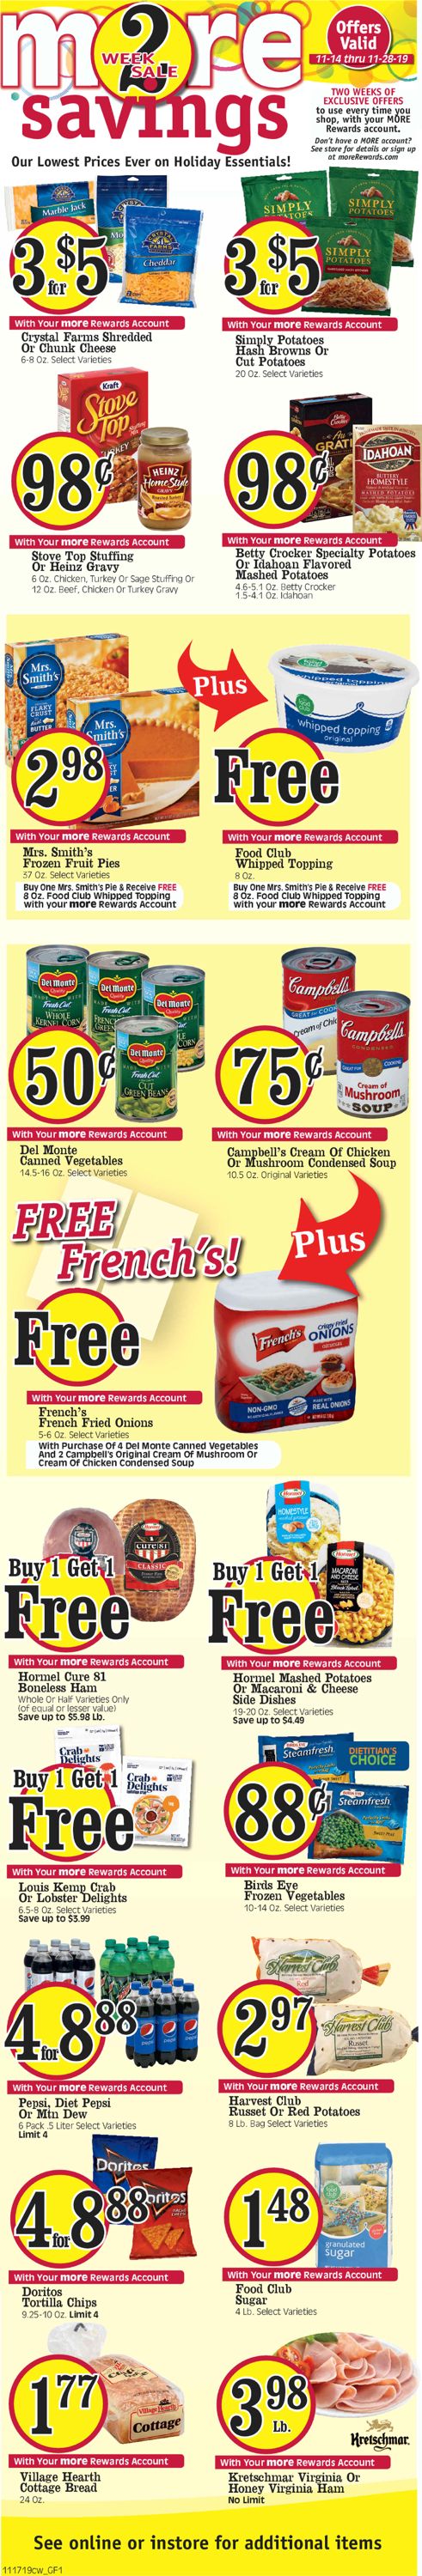 Cash Wise - Thanksgiving Ad 2019 Weekly Ad Circular - valid 11/20-11/26/2019 (Page 7)